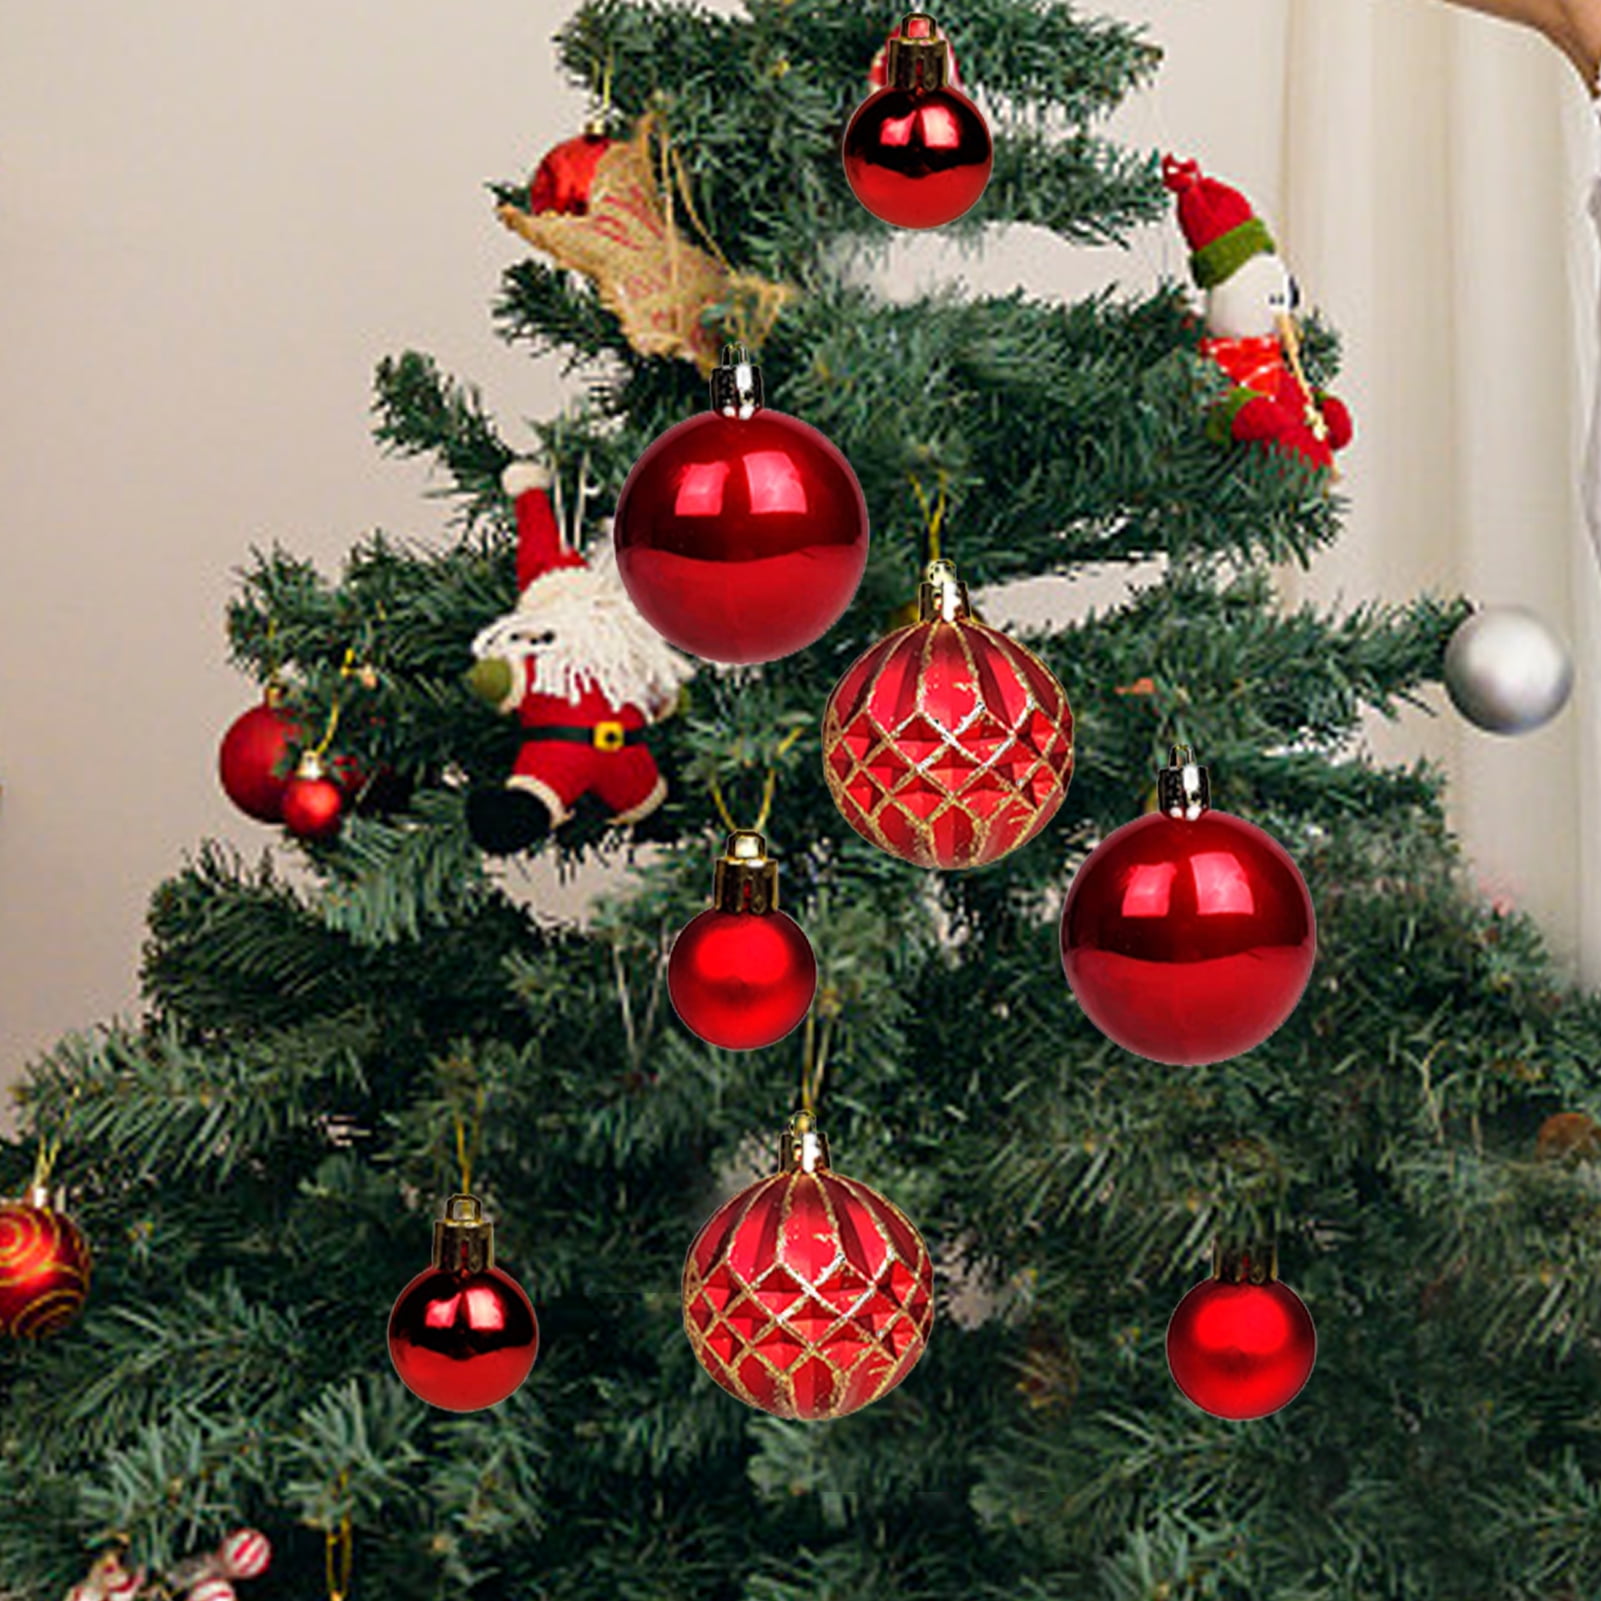 DIY Christmas Tree Christmas Decor Clearanceation: Dark Red Flocking Ball  Painting With Pearl Accents Perfect For Hanging Scene Layout And Festive Christmas  Decor Clearance From Xianstore09, $12.44